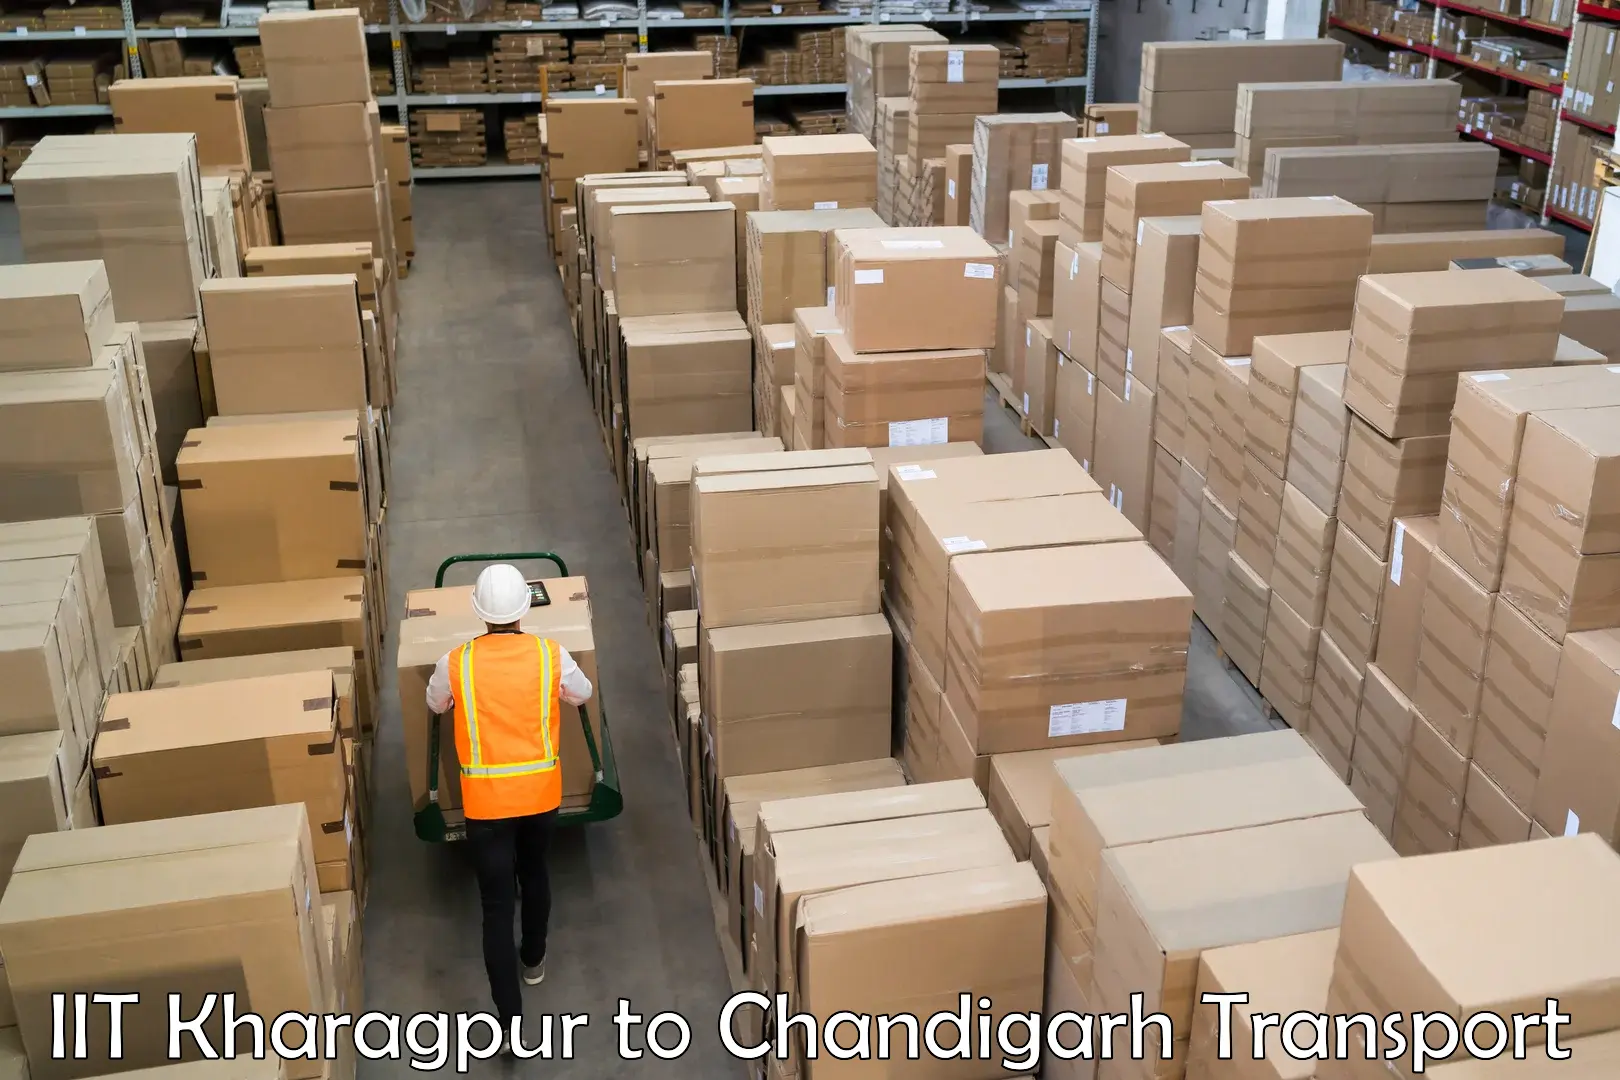 Express transport services in IIT Kharagpur to Chandigarh